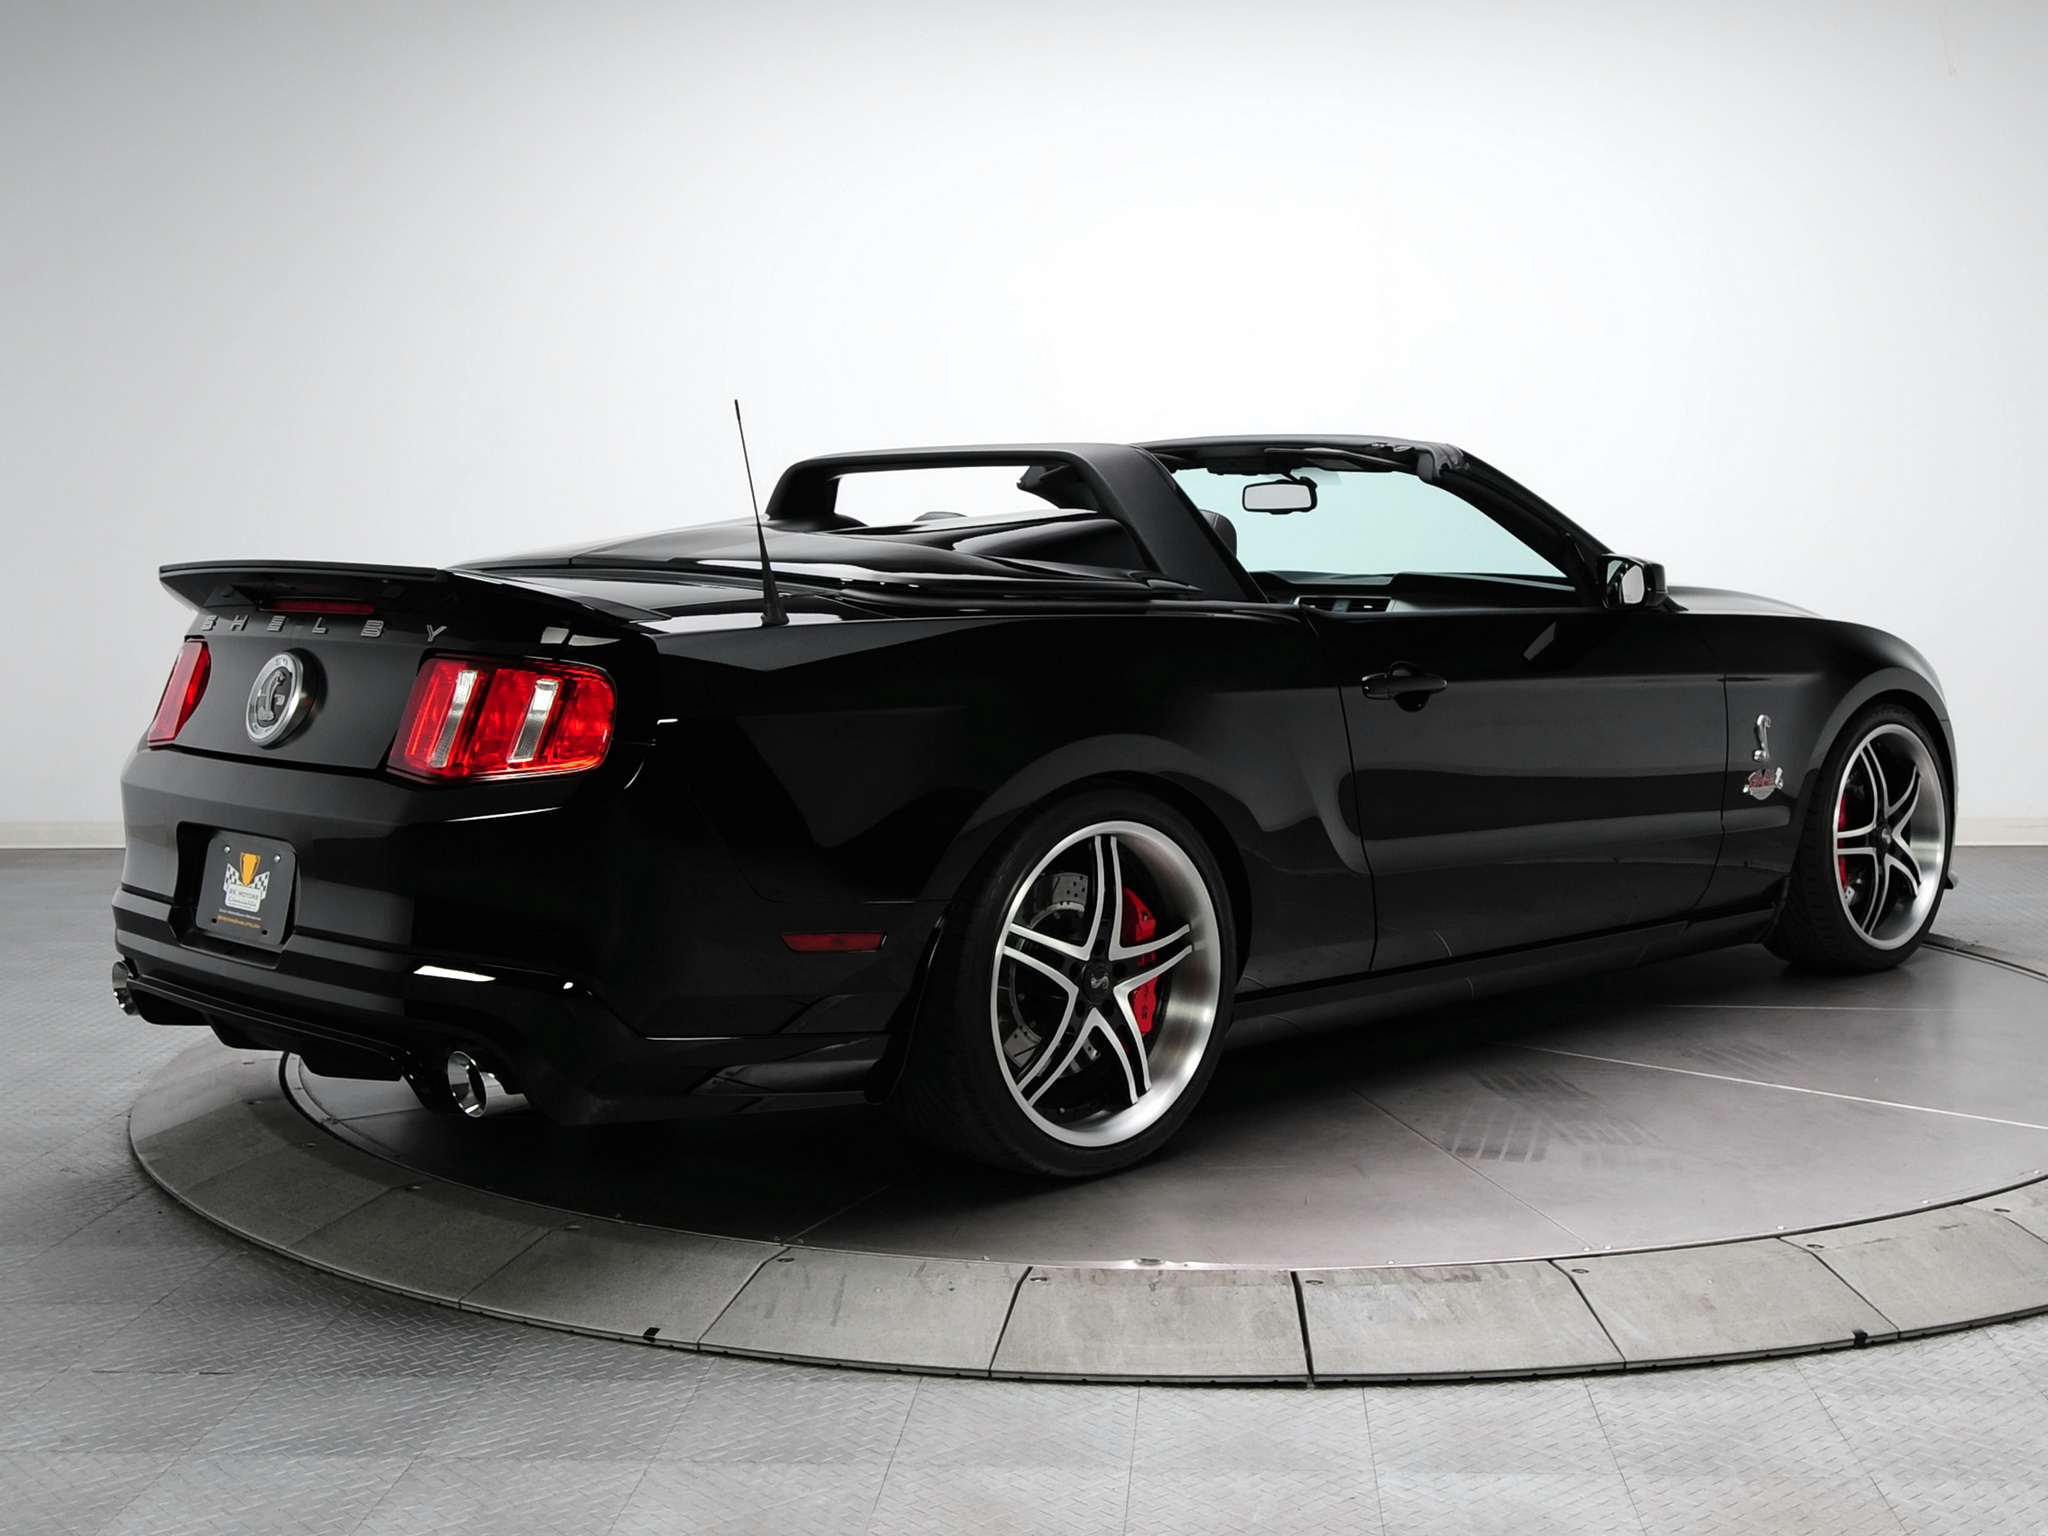 2010, Shelby, Gt500, Evolution performance, Stage 6, Ford, Mustang, Muscle, Tuning Wallpaper